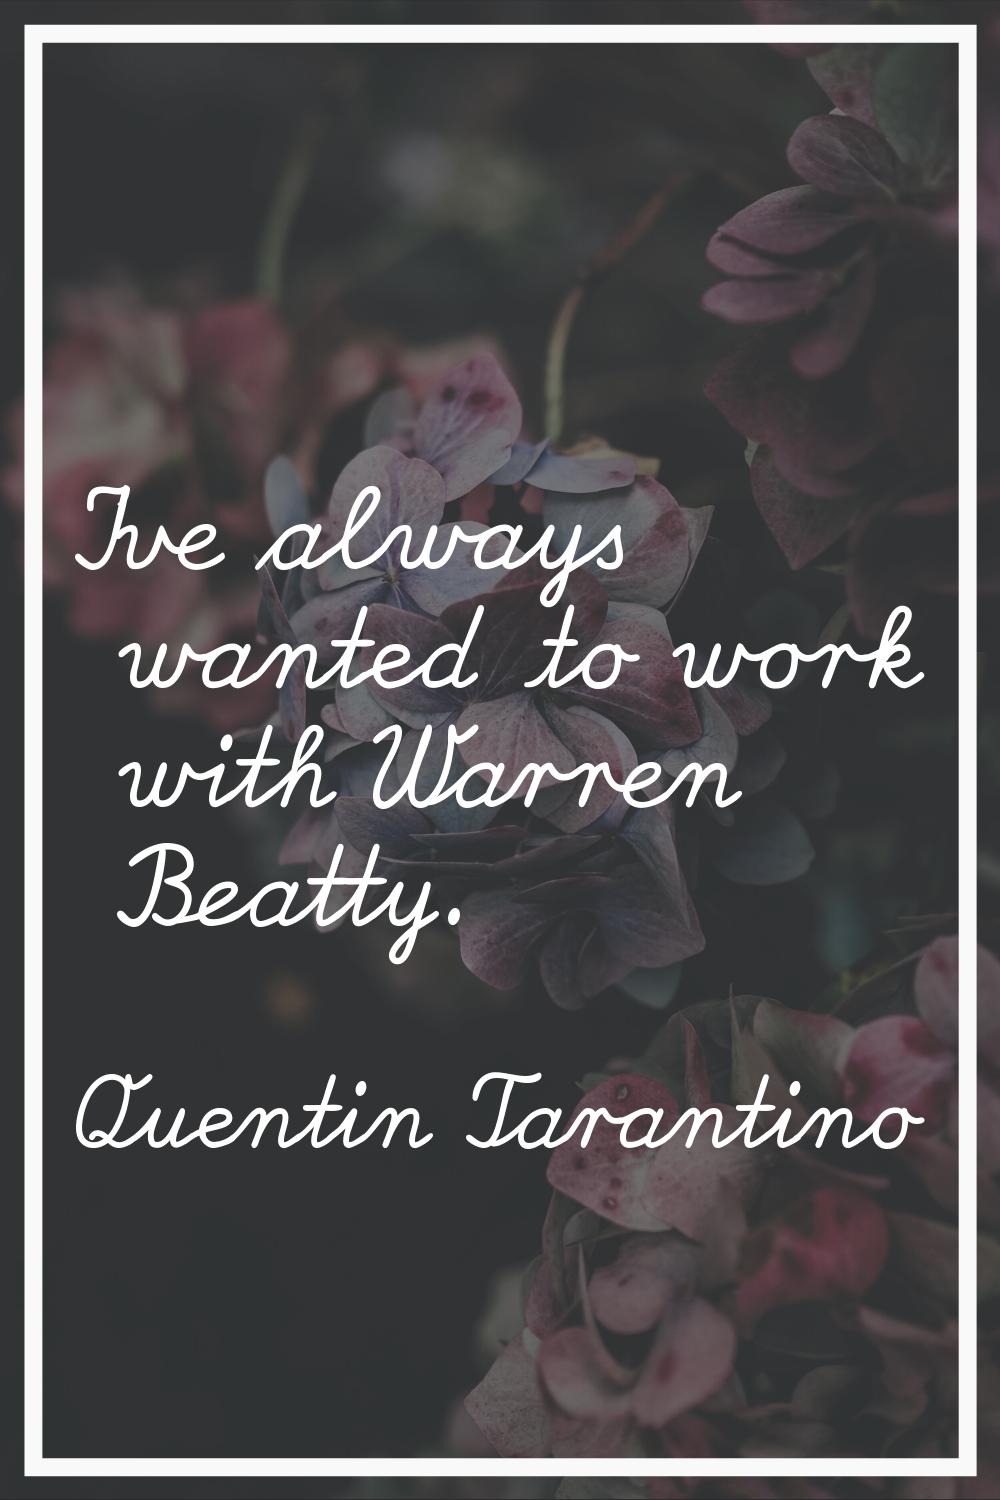 I've always wanted to work with Warren Beatty.